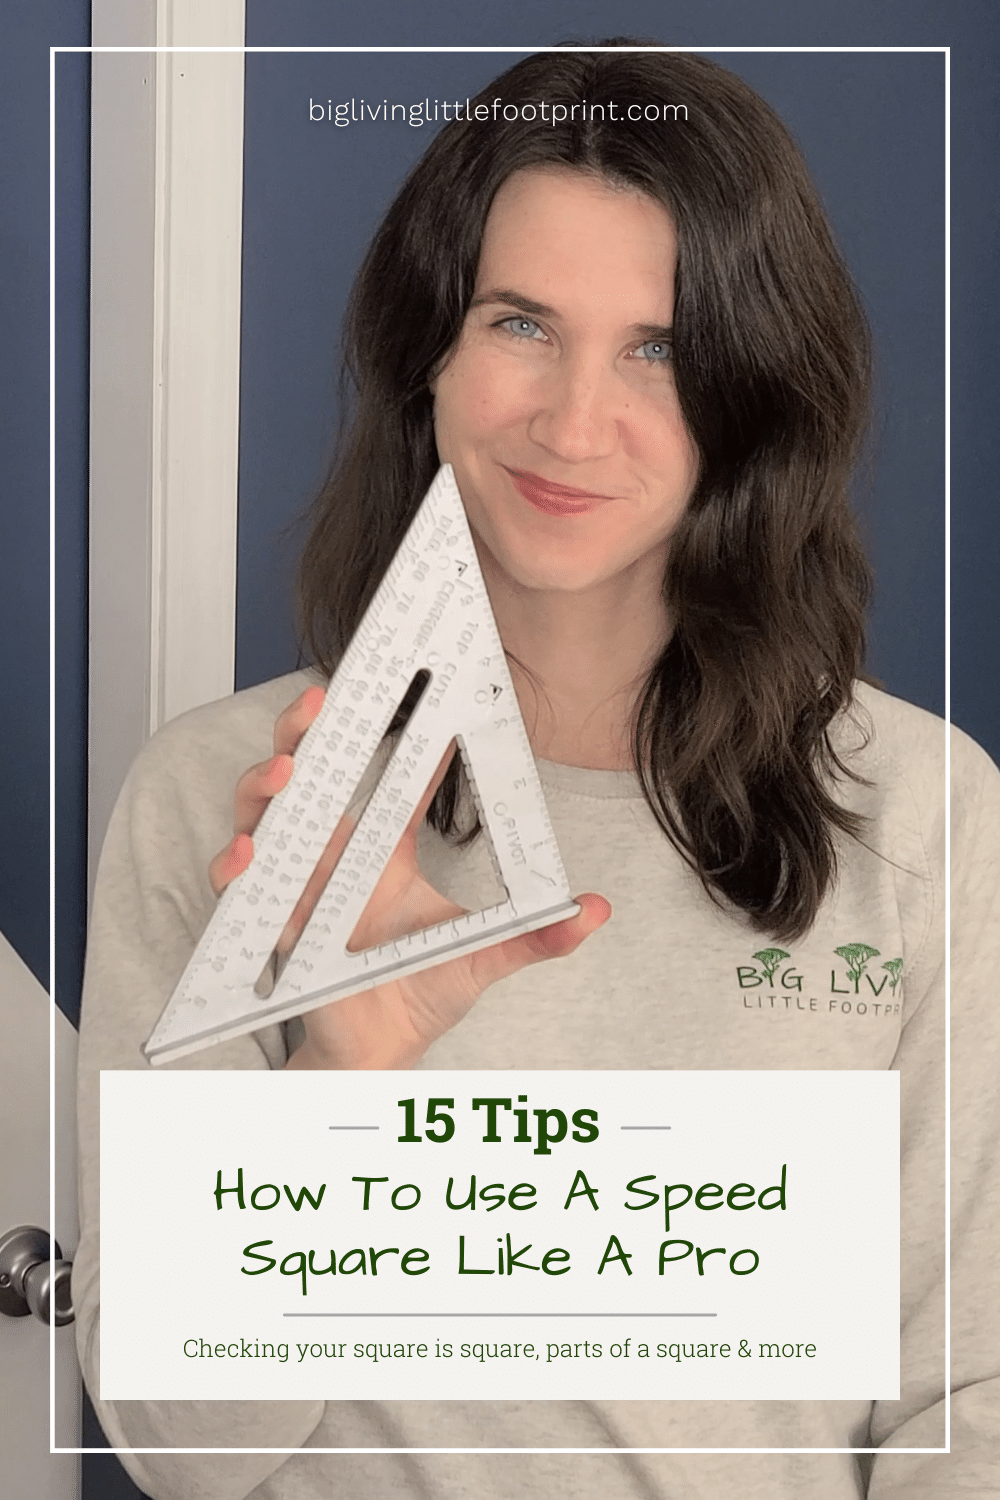 Photo of woman holding a speed square with intent on showing how to use it.